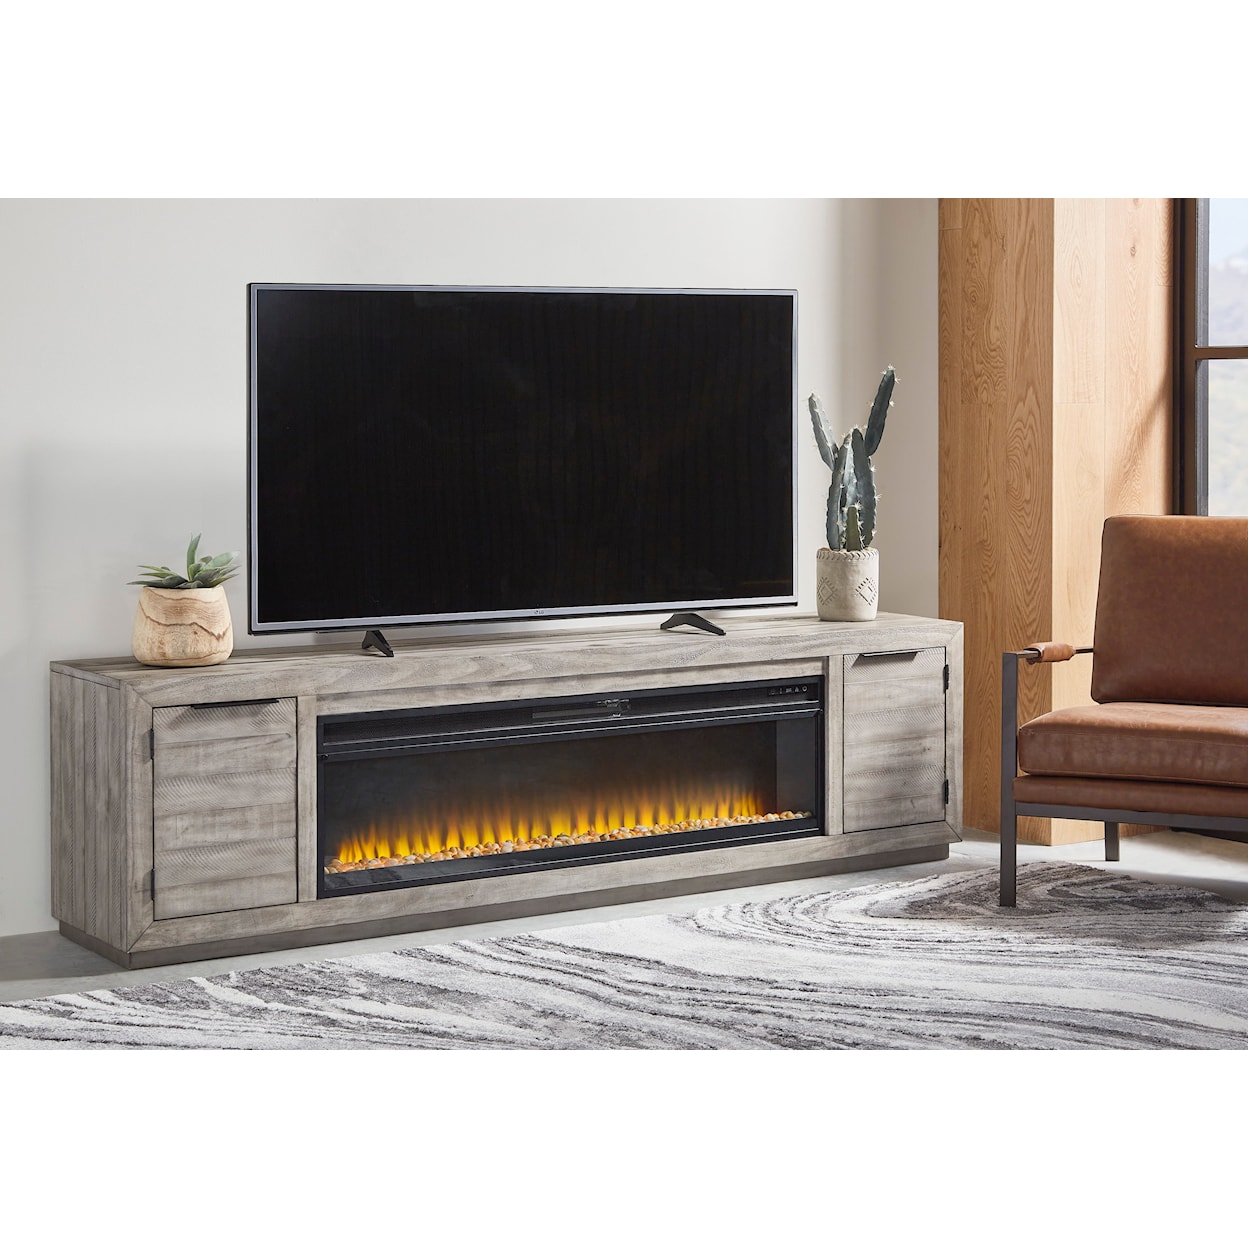 Signature Design Naydell 92" TV Stand with Electric Fireplace